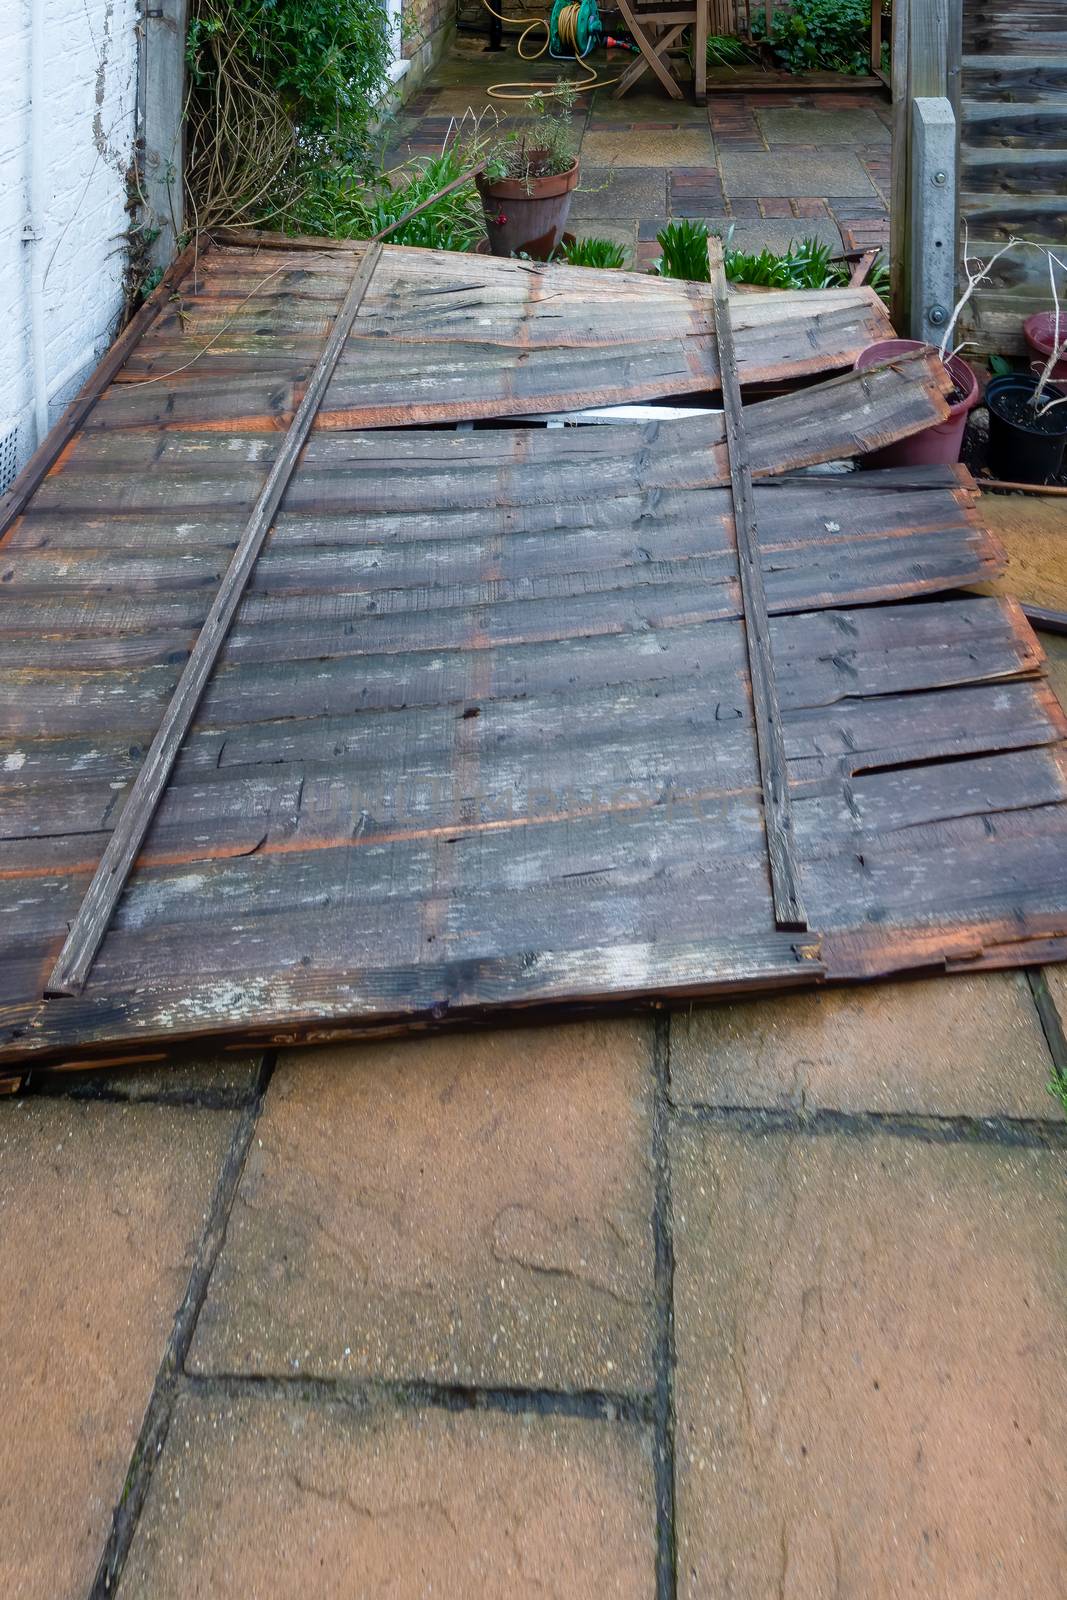 Garden fence panel blown down by strong winds during a storm by magicbones